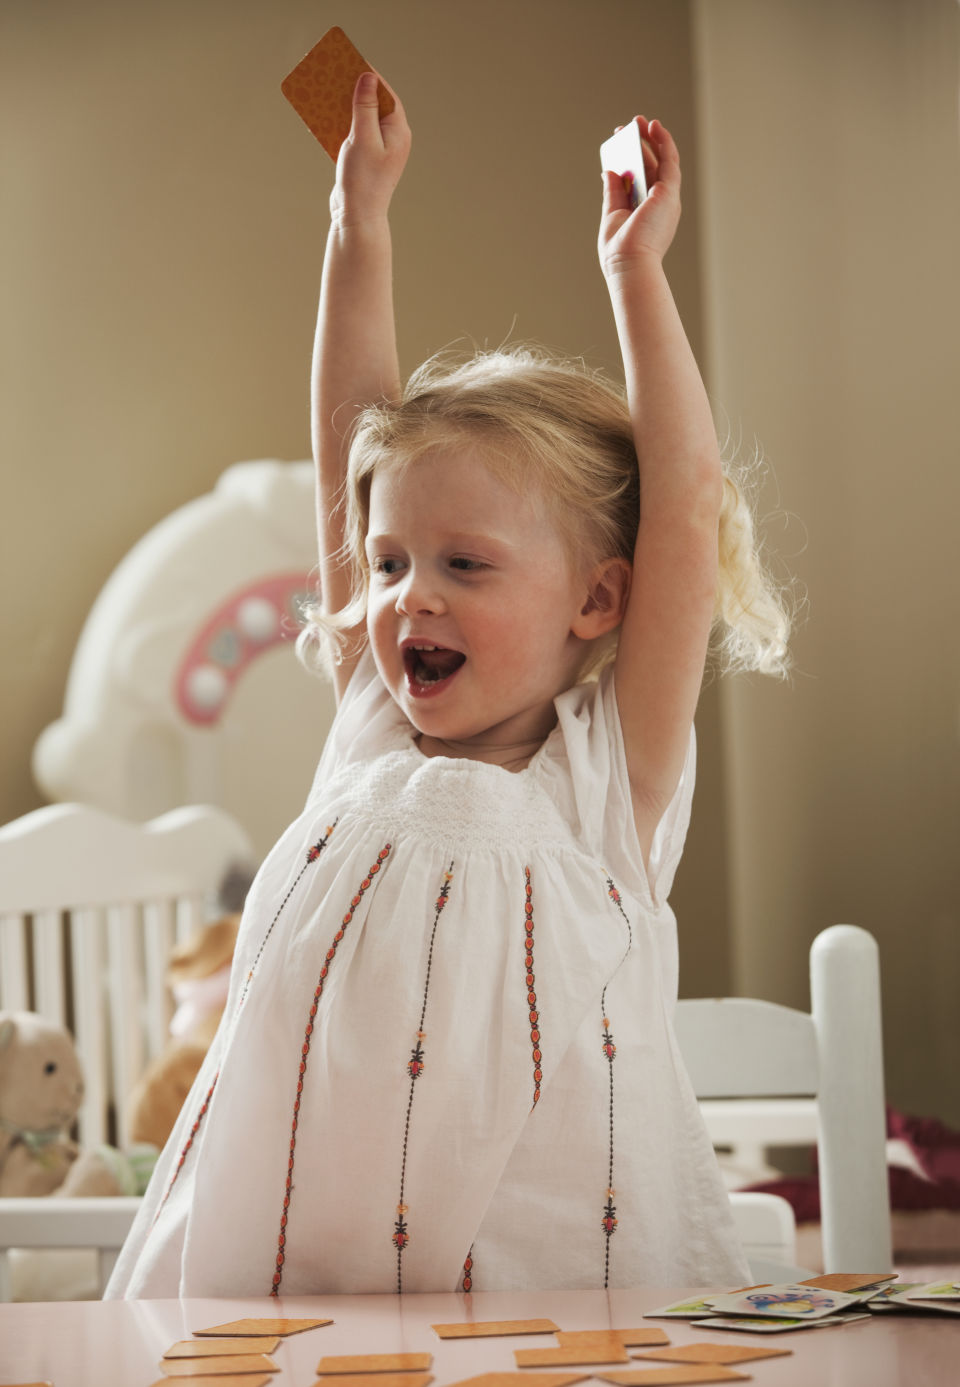 Girl throwing arms up excited